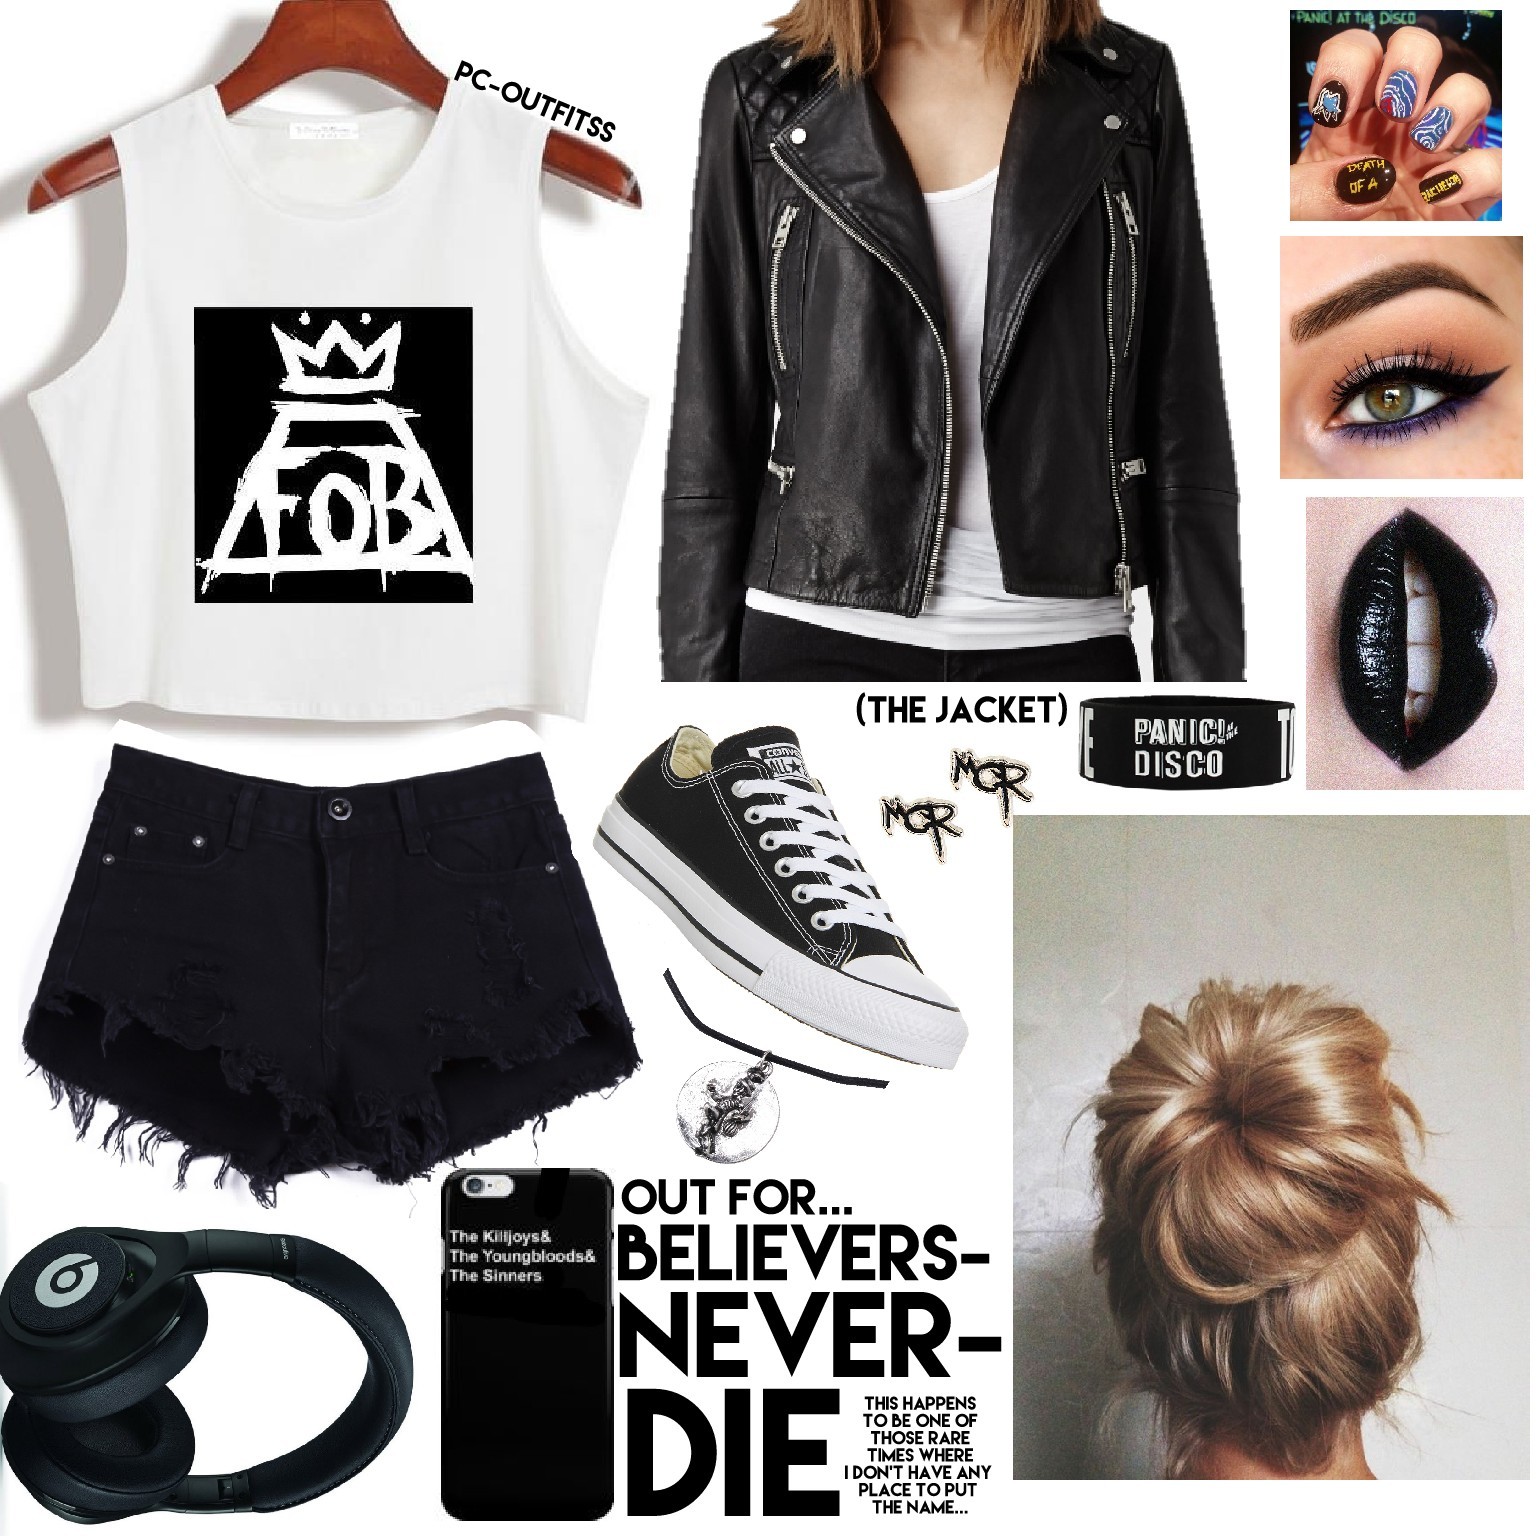 Pc-outfitss|| Outfit for believers-never-die... I WAS SO FLIPPING EXCITED TO MAKE THIS BECAUSE I RELATE TO THIS ON A SPIRITUAL LEVEL. there ya go